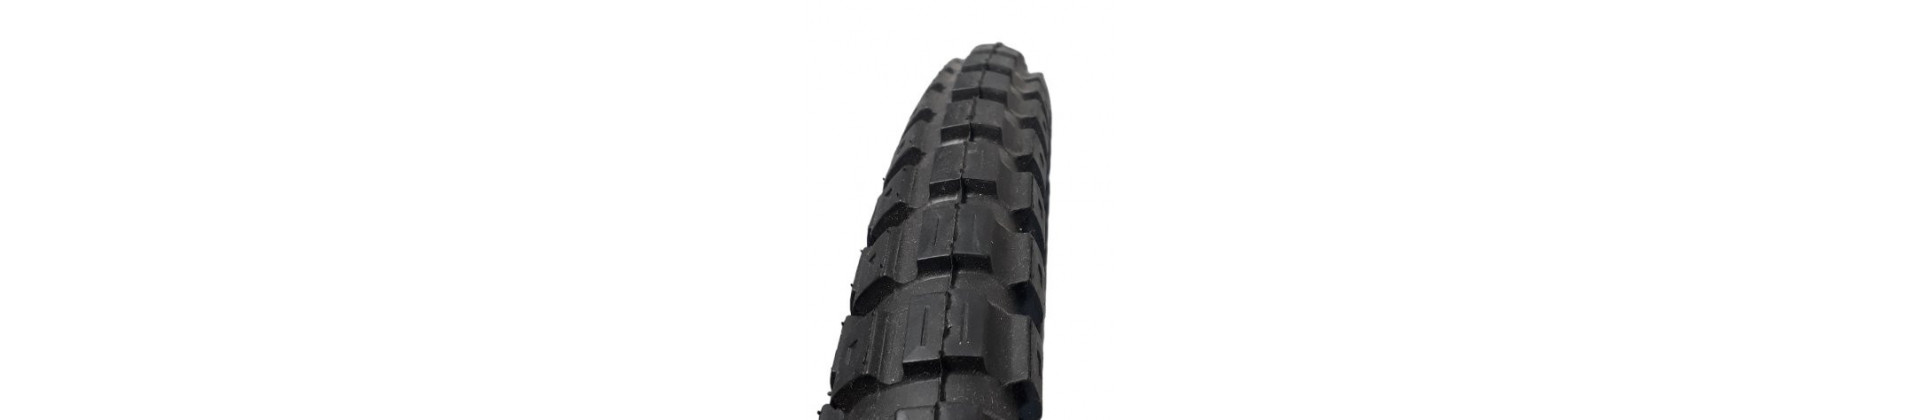 BMX tire, air tube and accessories